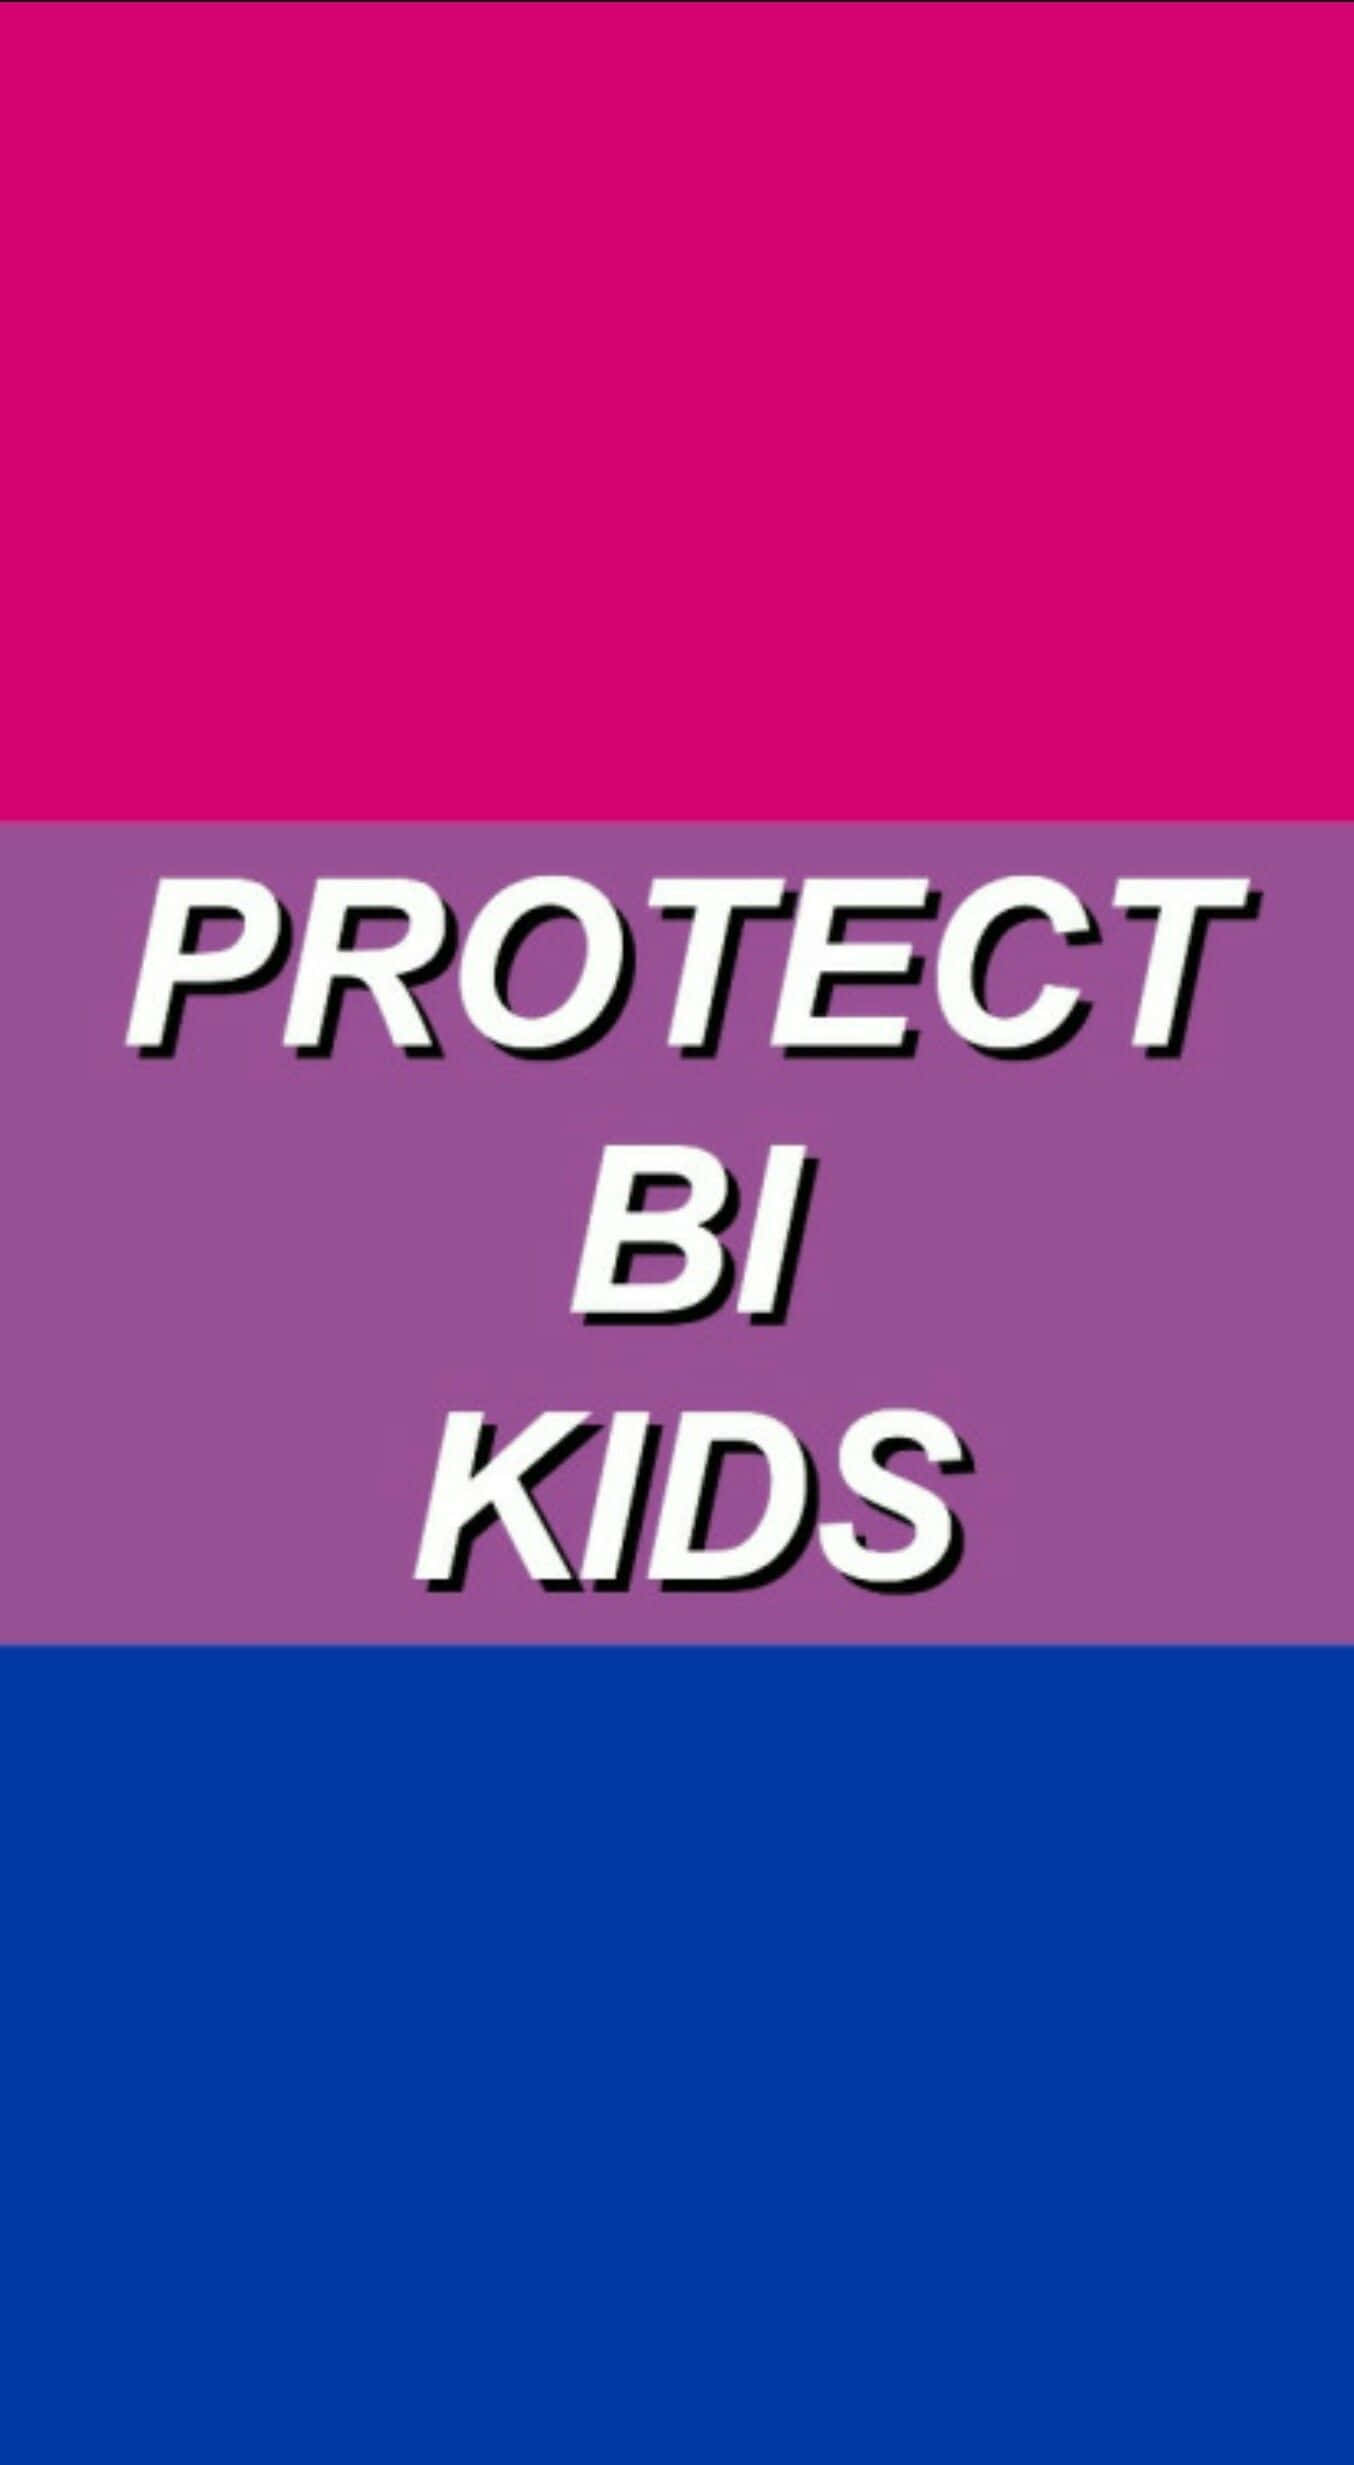 Protect Bi Kids - A Pink And Purple Flag With The Words Protect Bi Kids